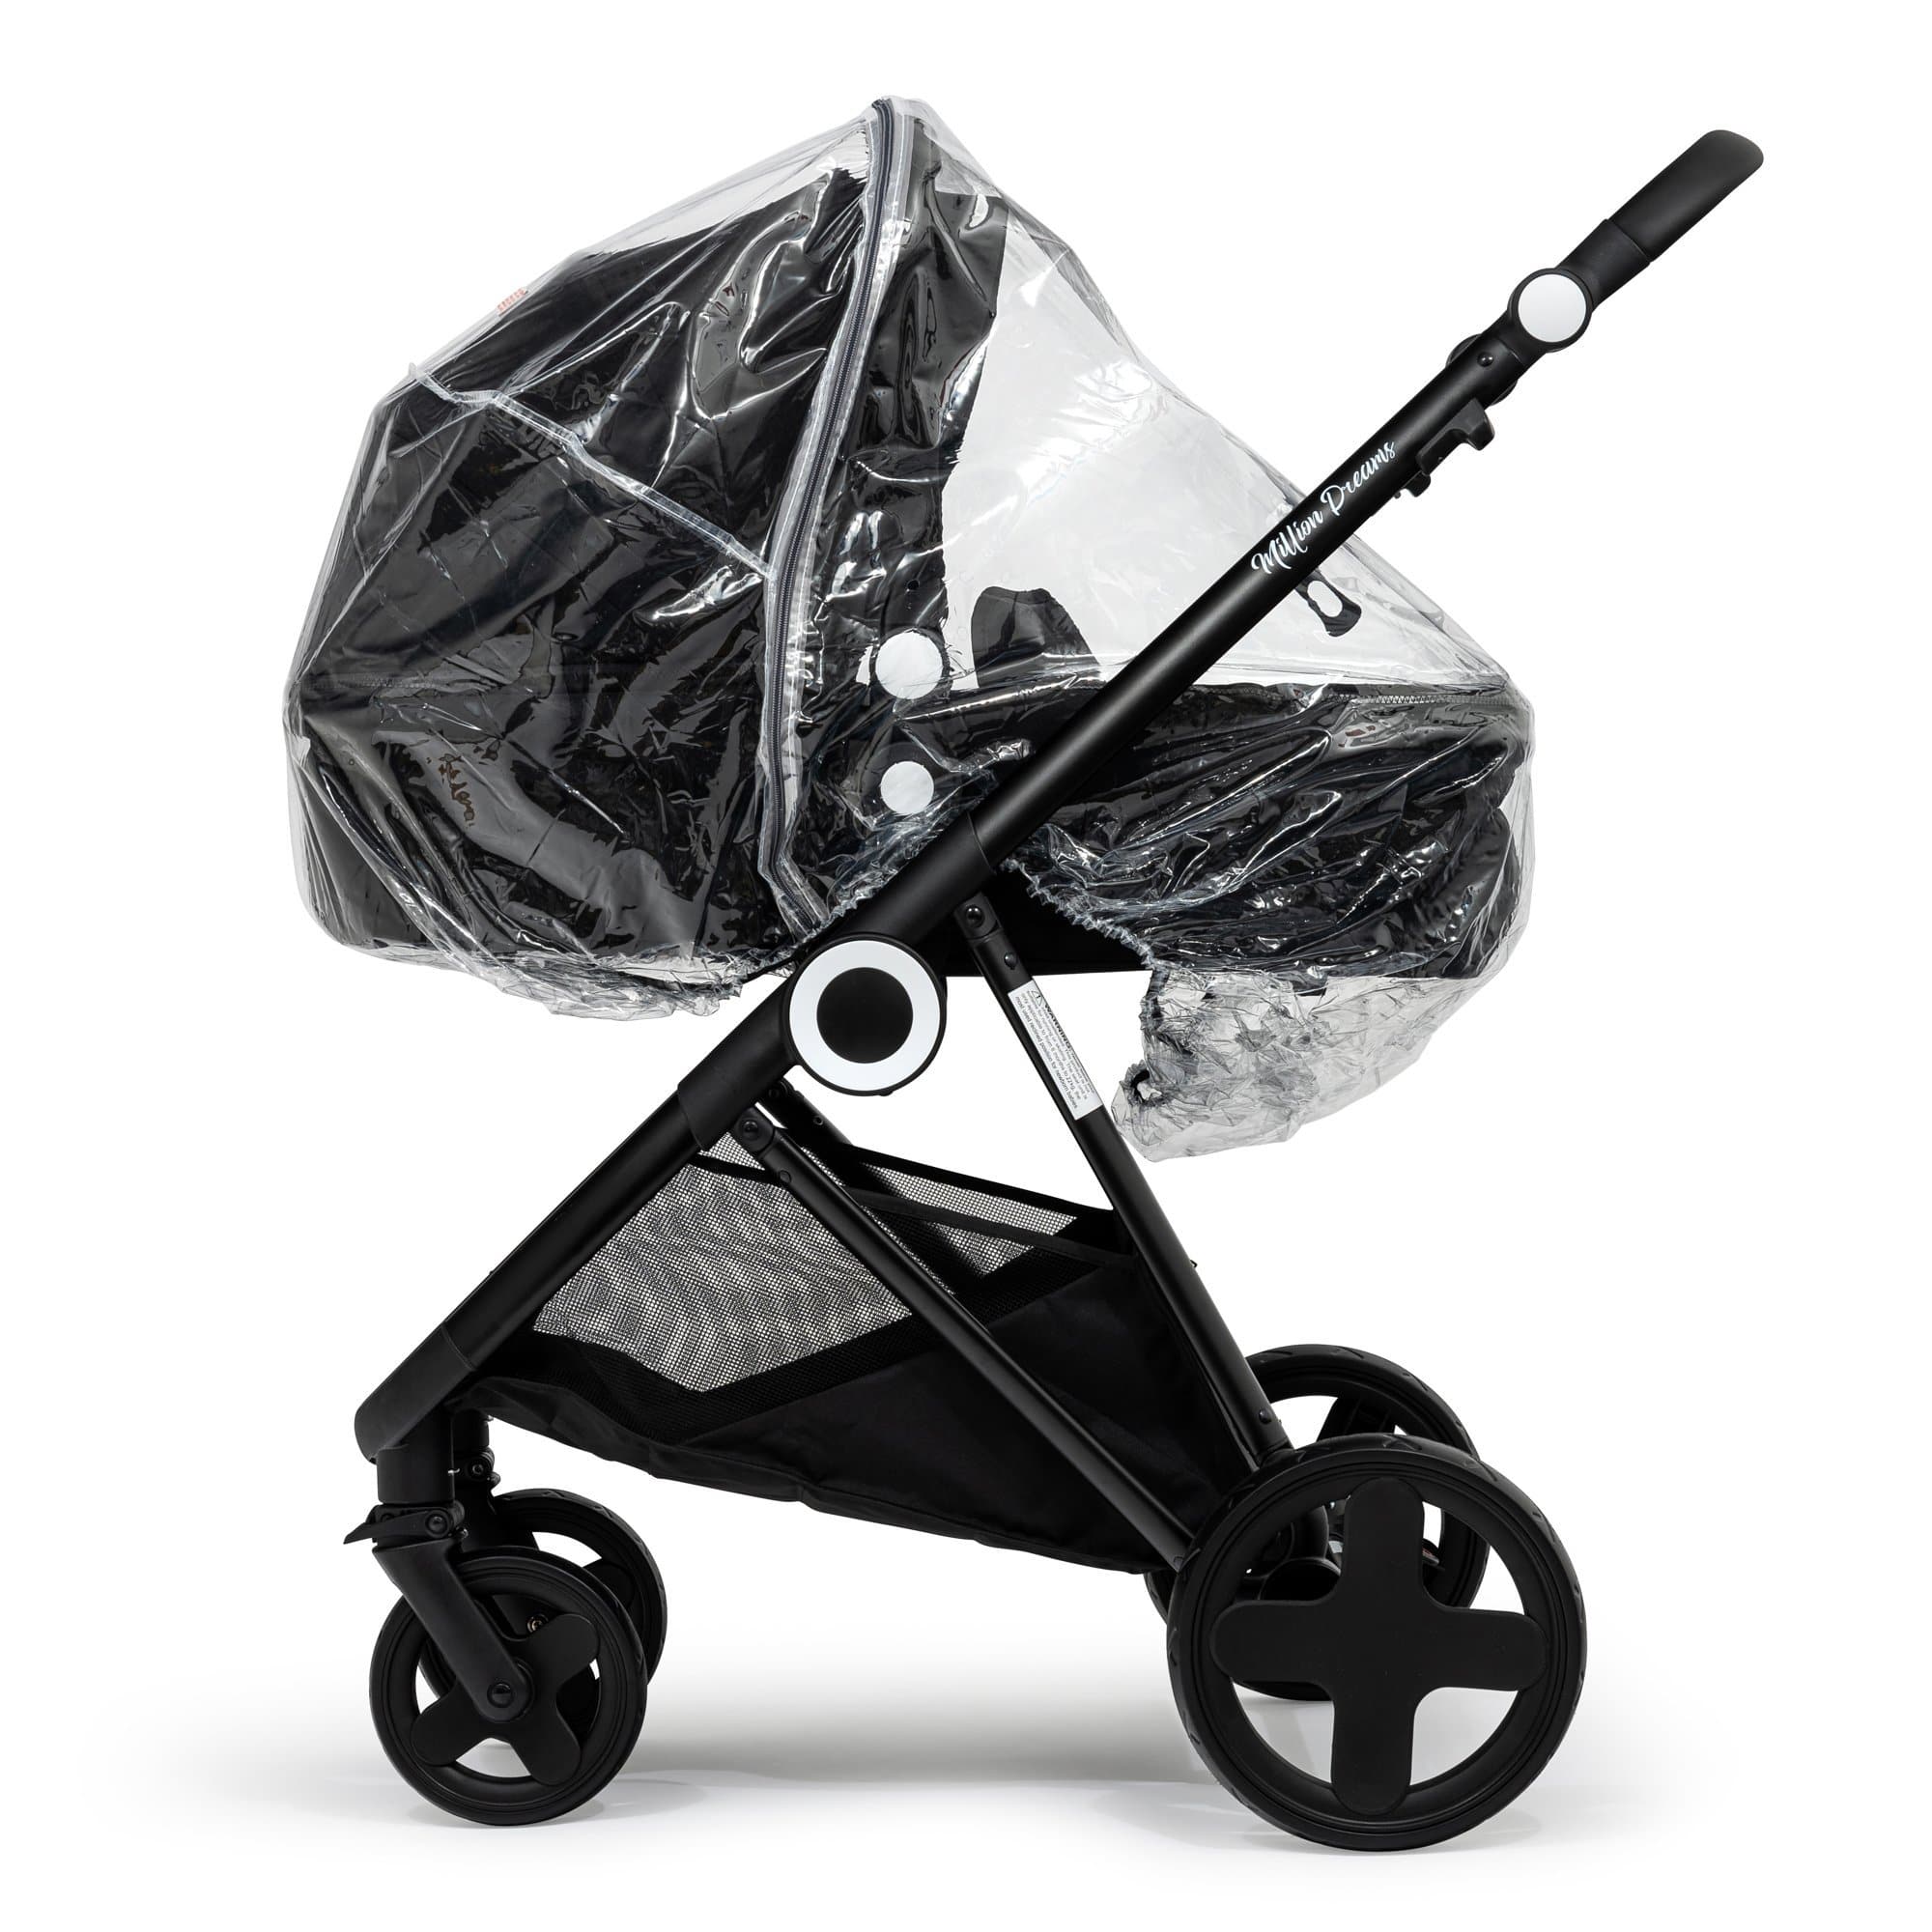 2 in 1 Rain Cover Compatible with Babyzen - Fits All Models - For Your Little One